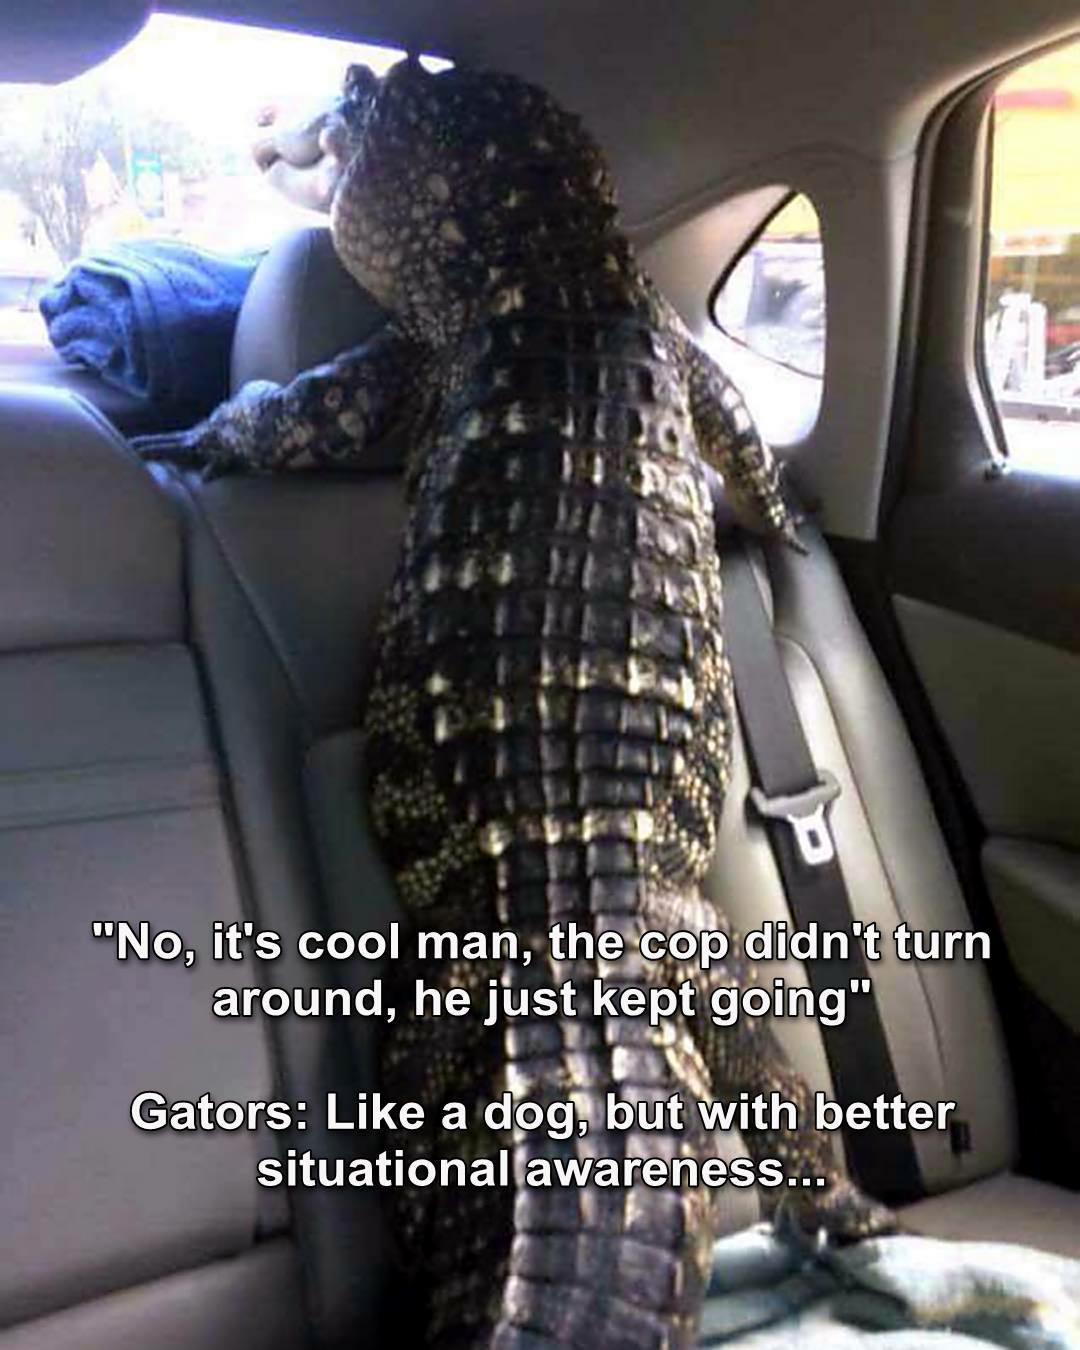 interior crocodile alligator - "No, it's cool man, the cop didn't turn around, he just kept going" Gators a dog, but with better situational awareness...